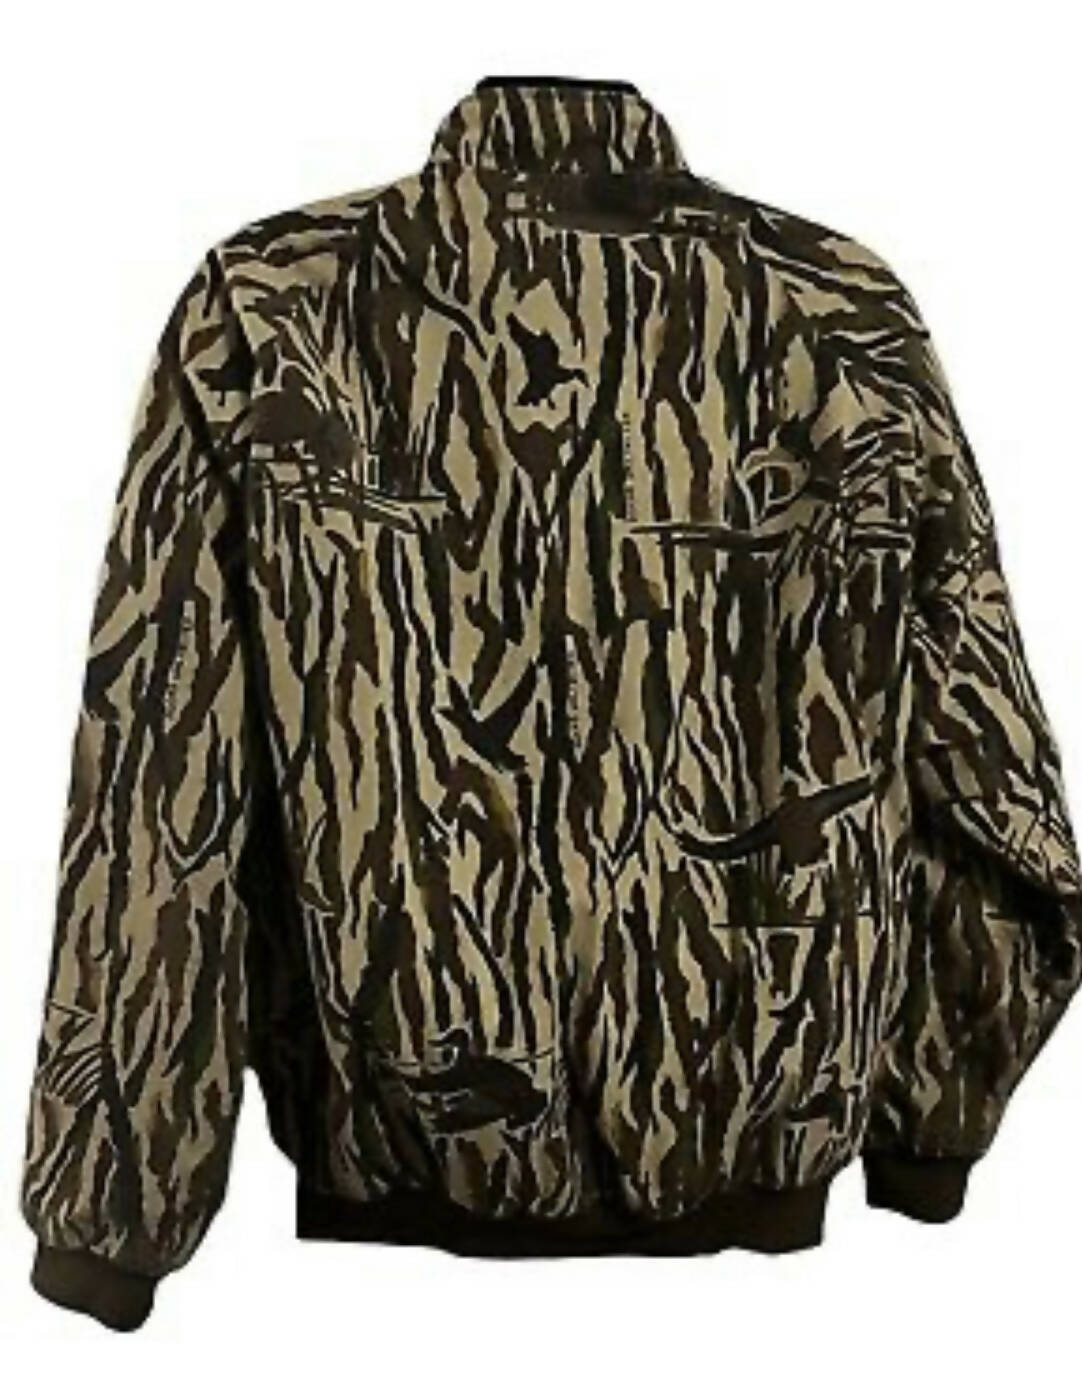 VTG Very Rare Rattlers Brand Ducks Unlimited Camo Insulated Jacket